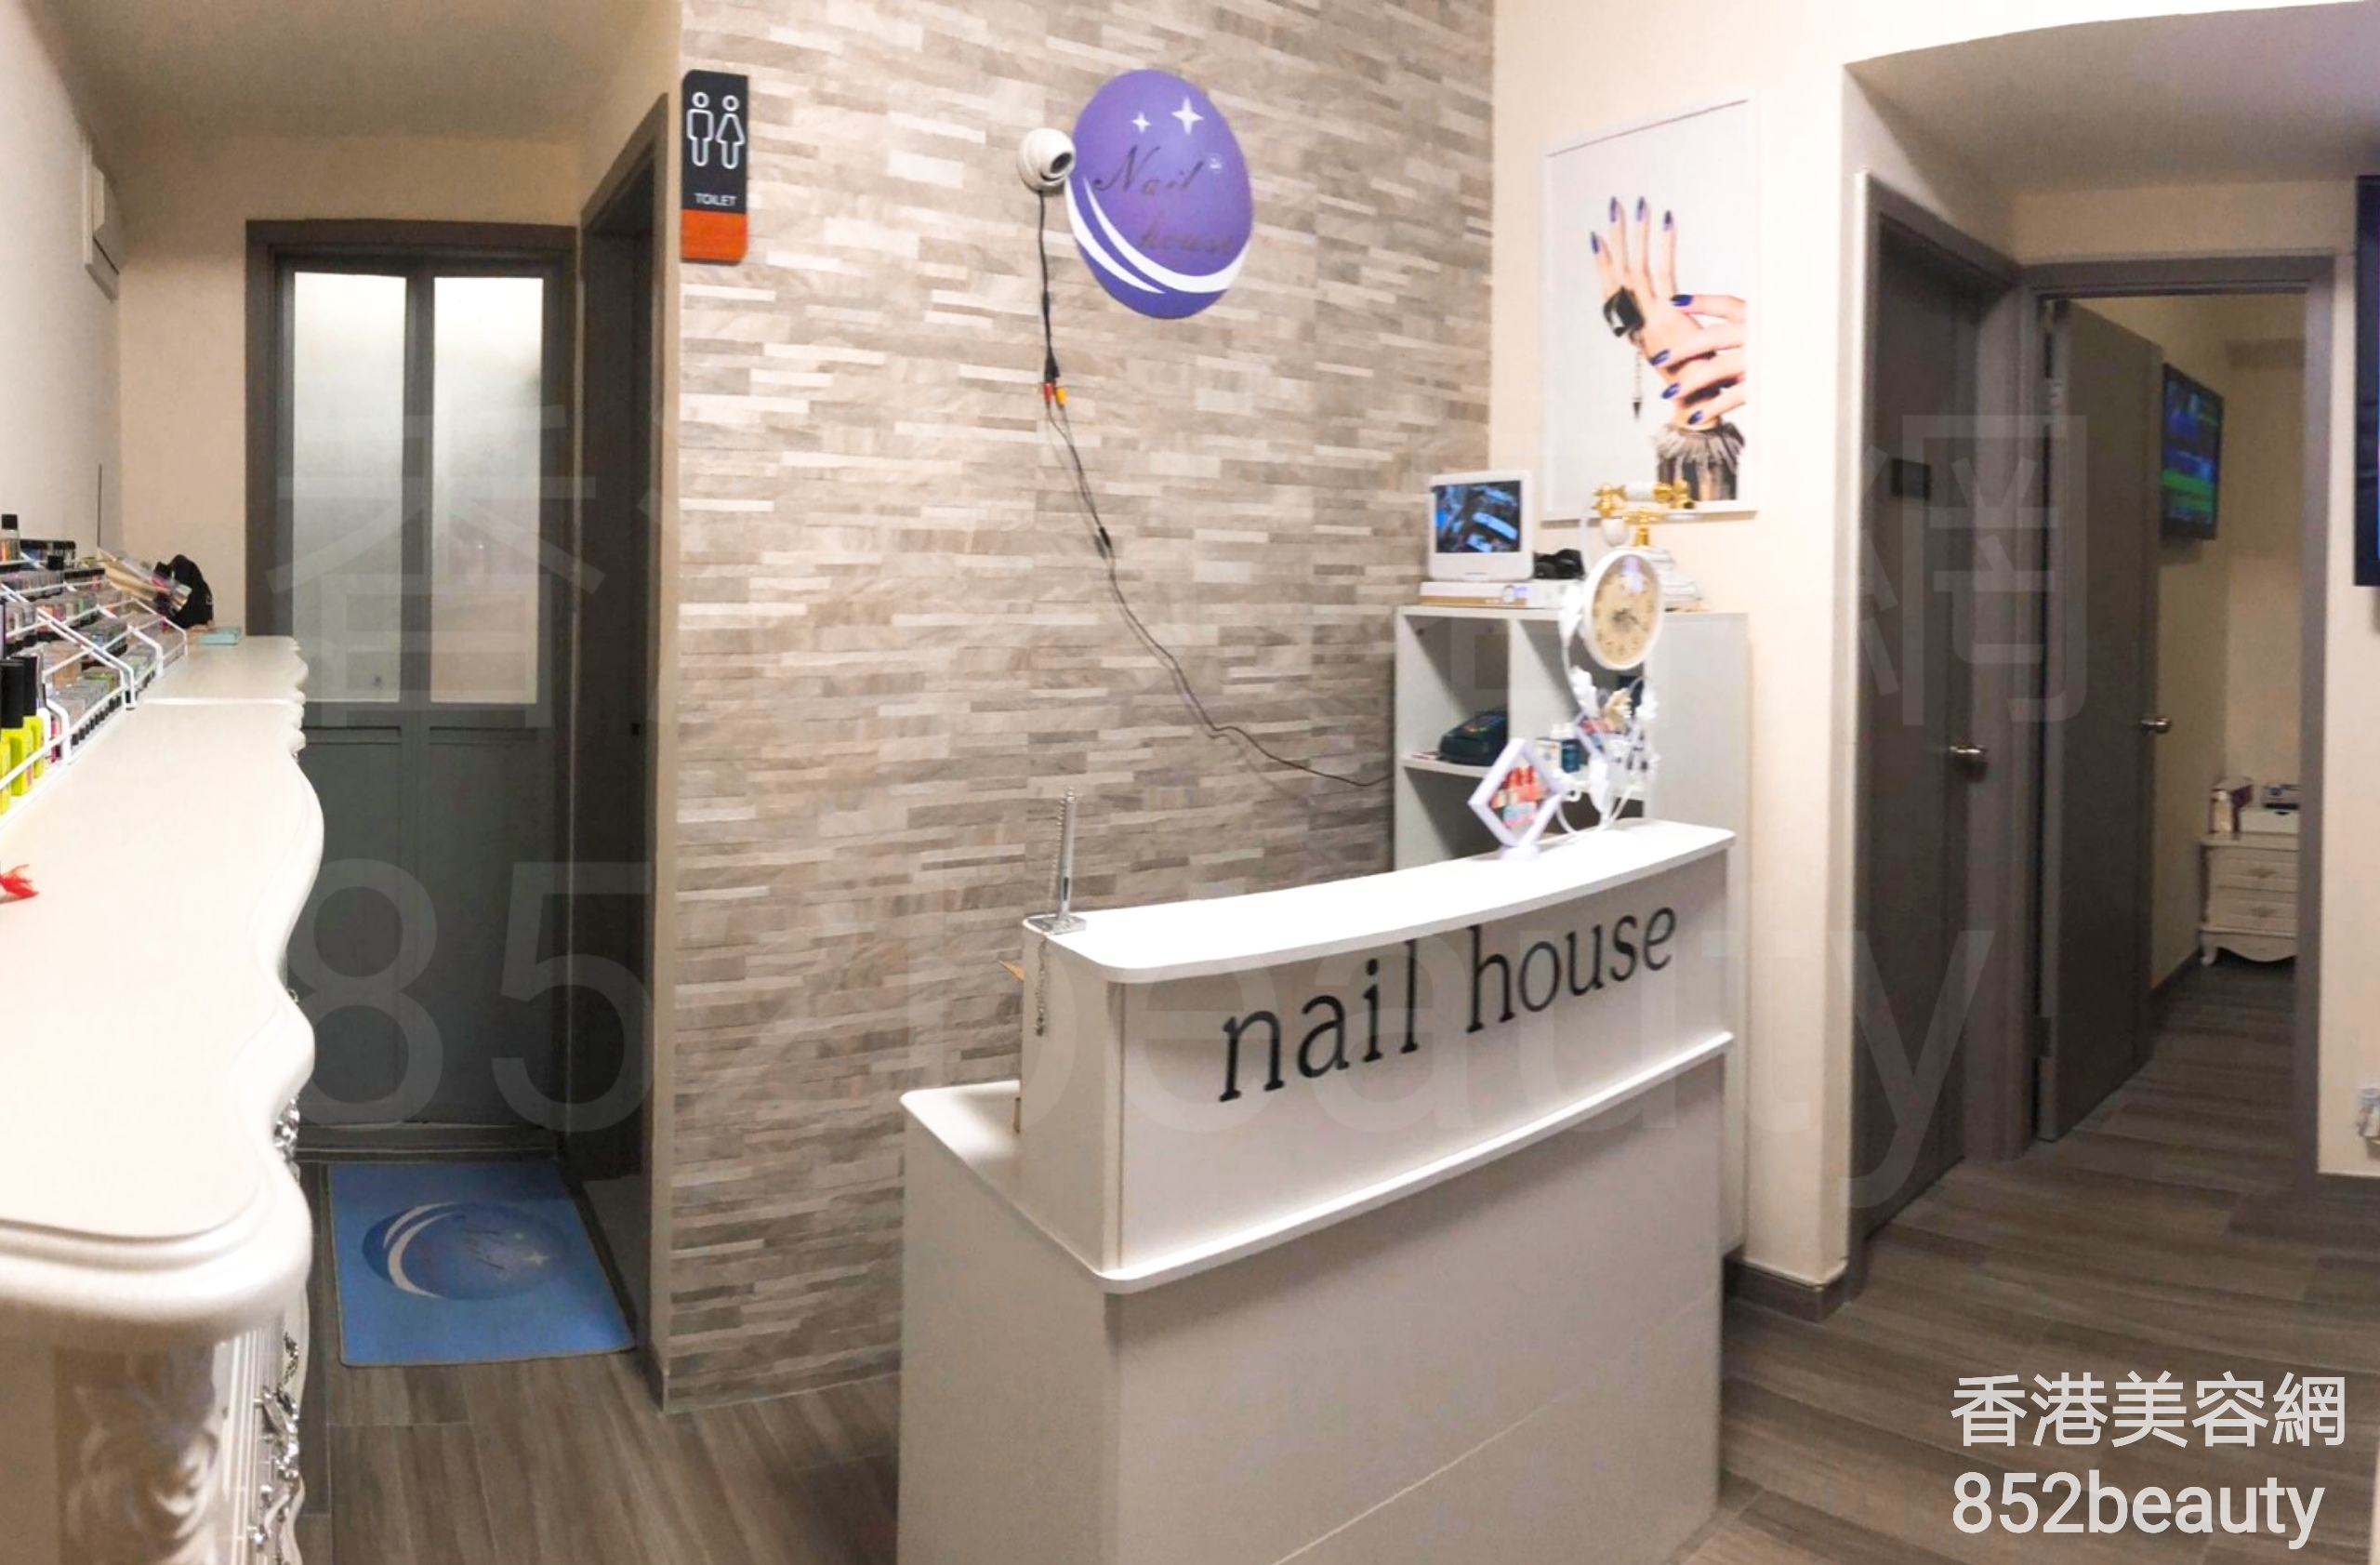 Hand and foot care: NAIL HOUSE 美甲屋